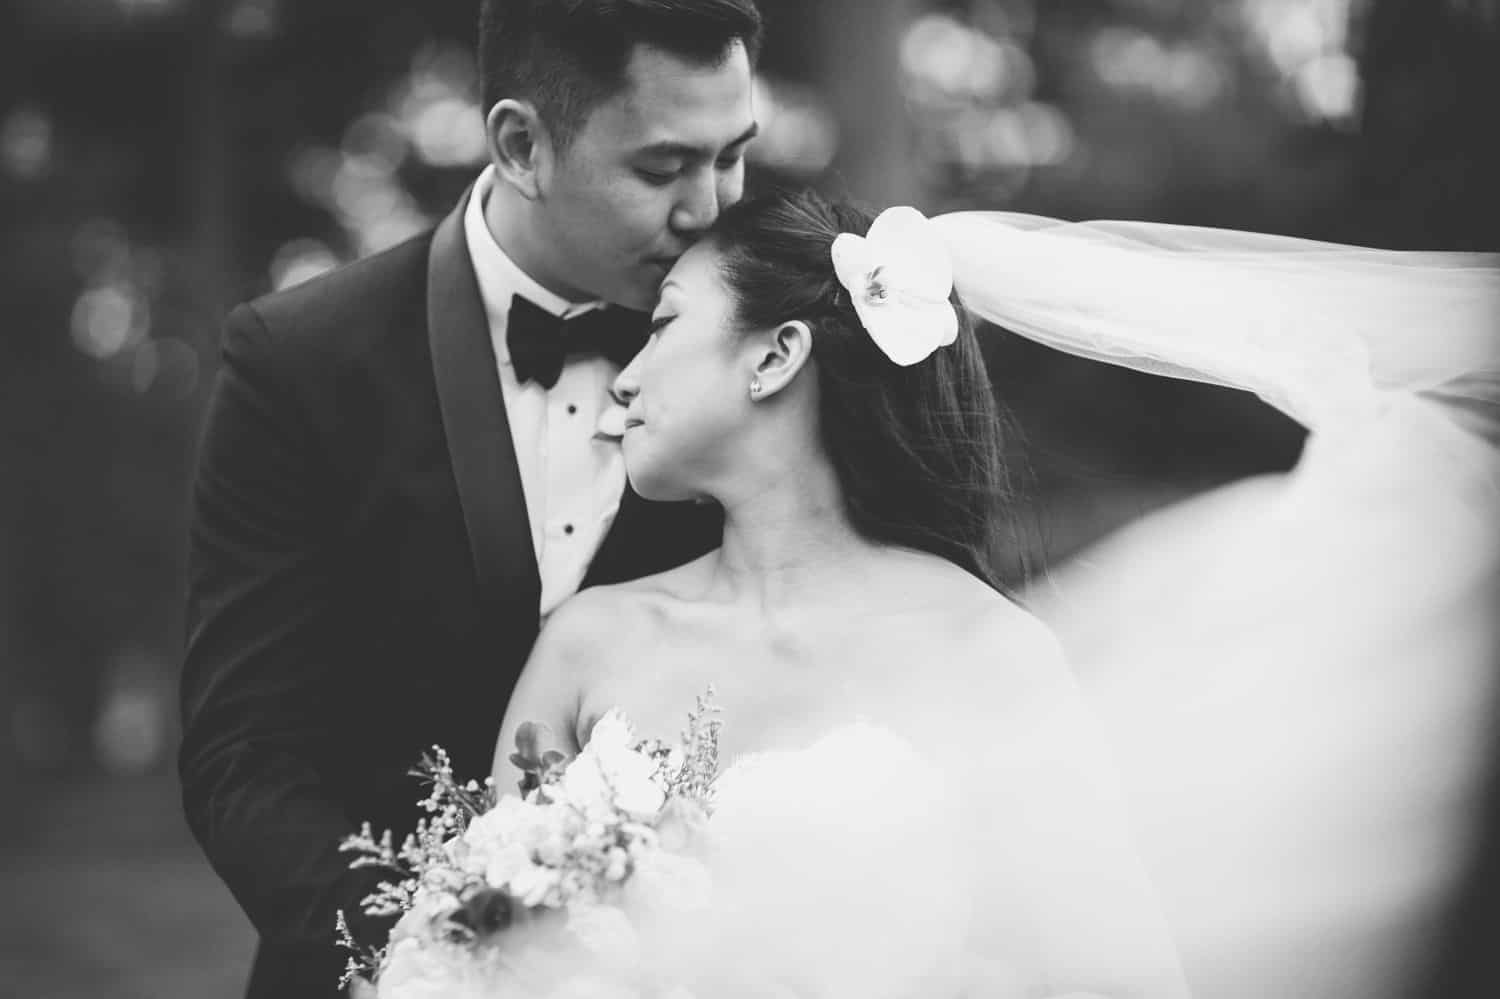 Black and white photo of bride and groom. Groom is kissing bride on forehead as her veil blows in the wind. By Harris & Co.